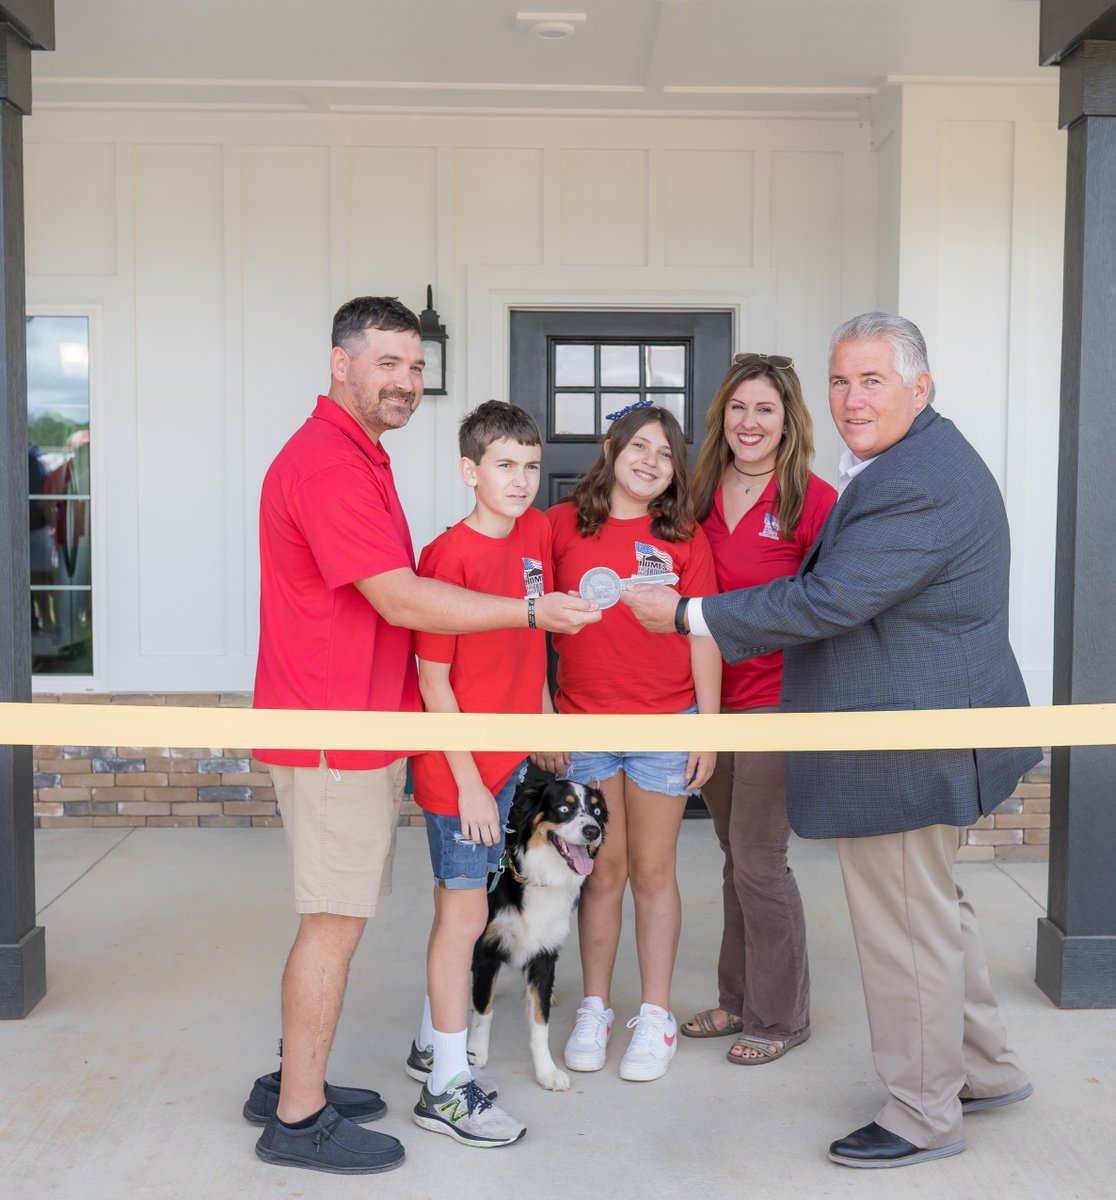 Welcome home! This past weekend, Homes For Our Troops proudly presented Marine SSgt Johnny Morris and his family with the keys to his new specially adapted custom home in Elberta, AL!